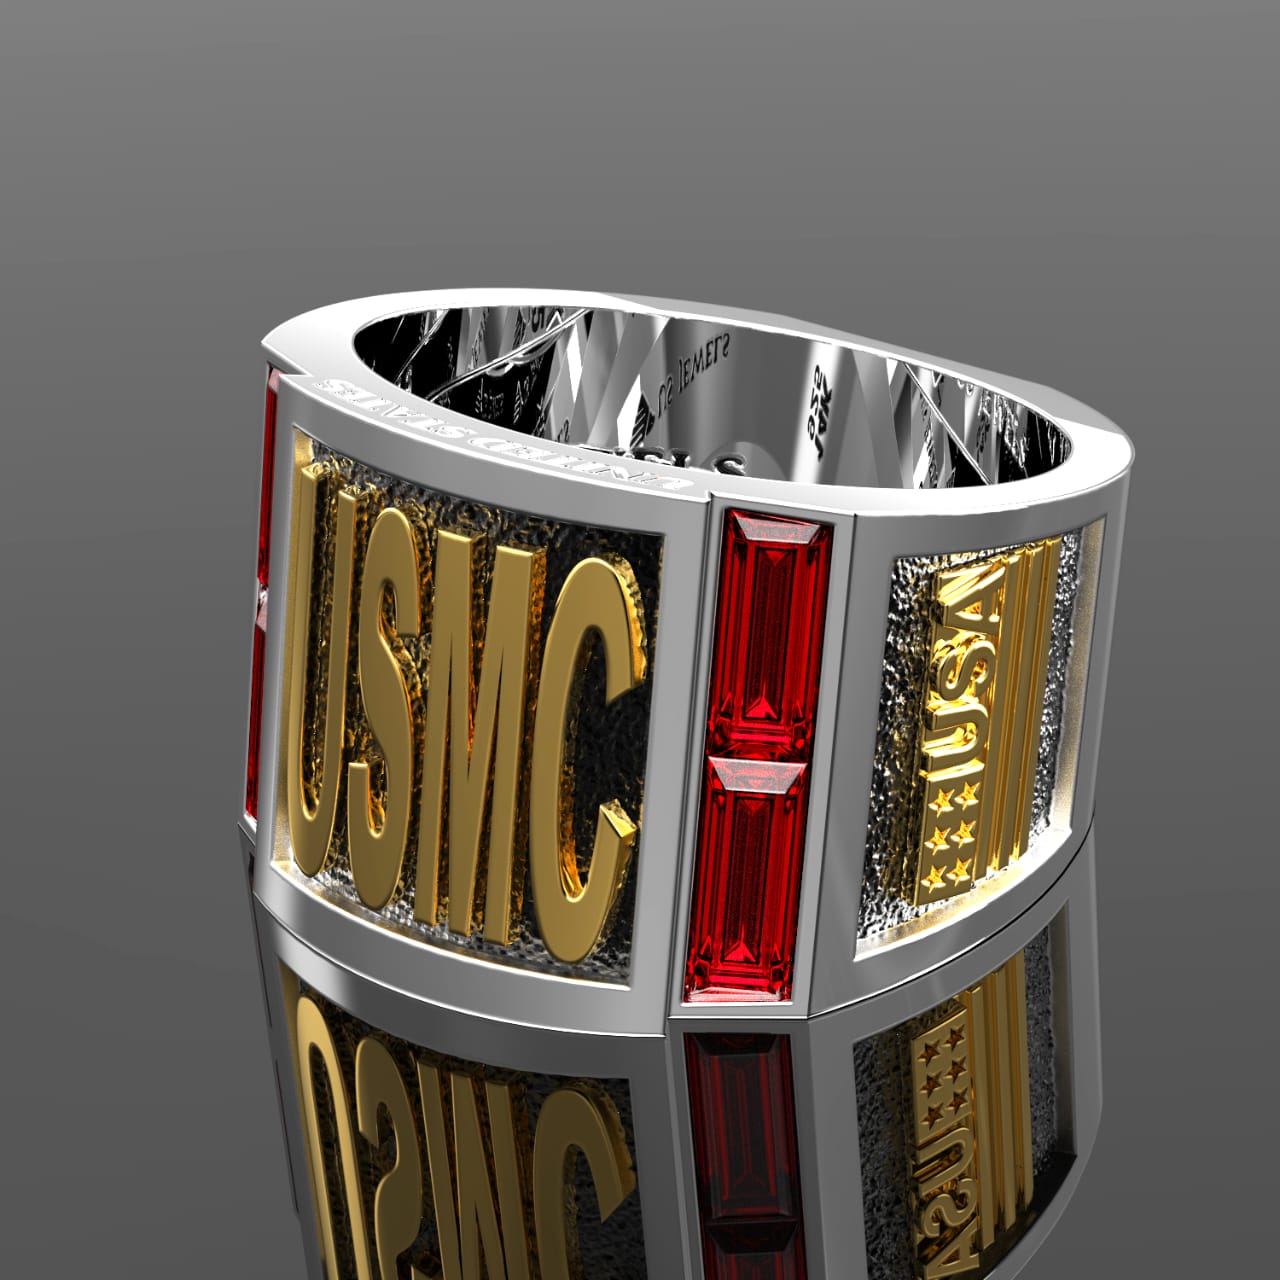 Men's Two Tone 925 Sterling Silver and 14k Yellow Gold Synthetic Rubies US Marine Corps USMC Ring